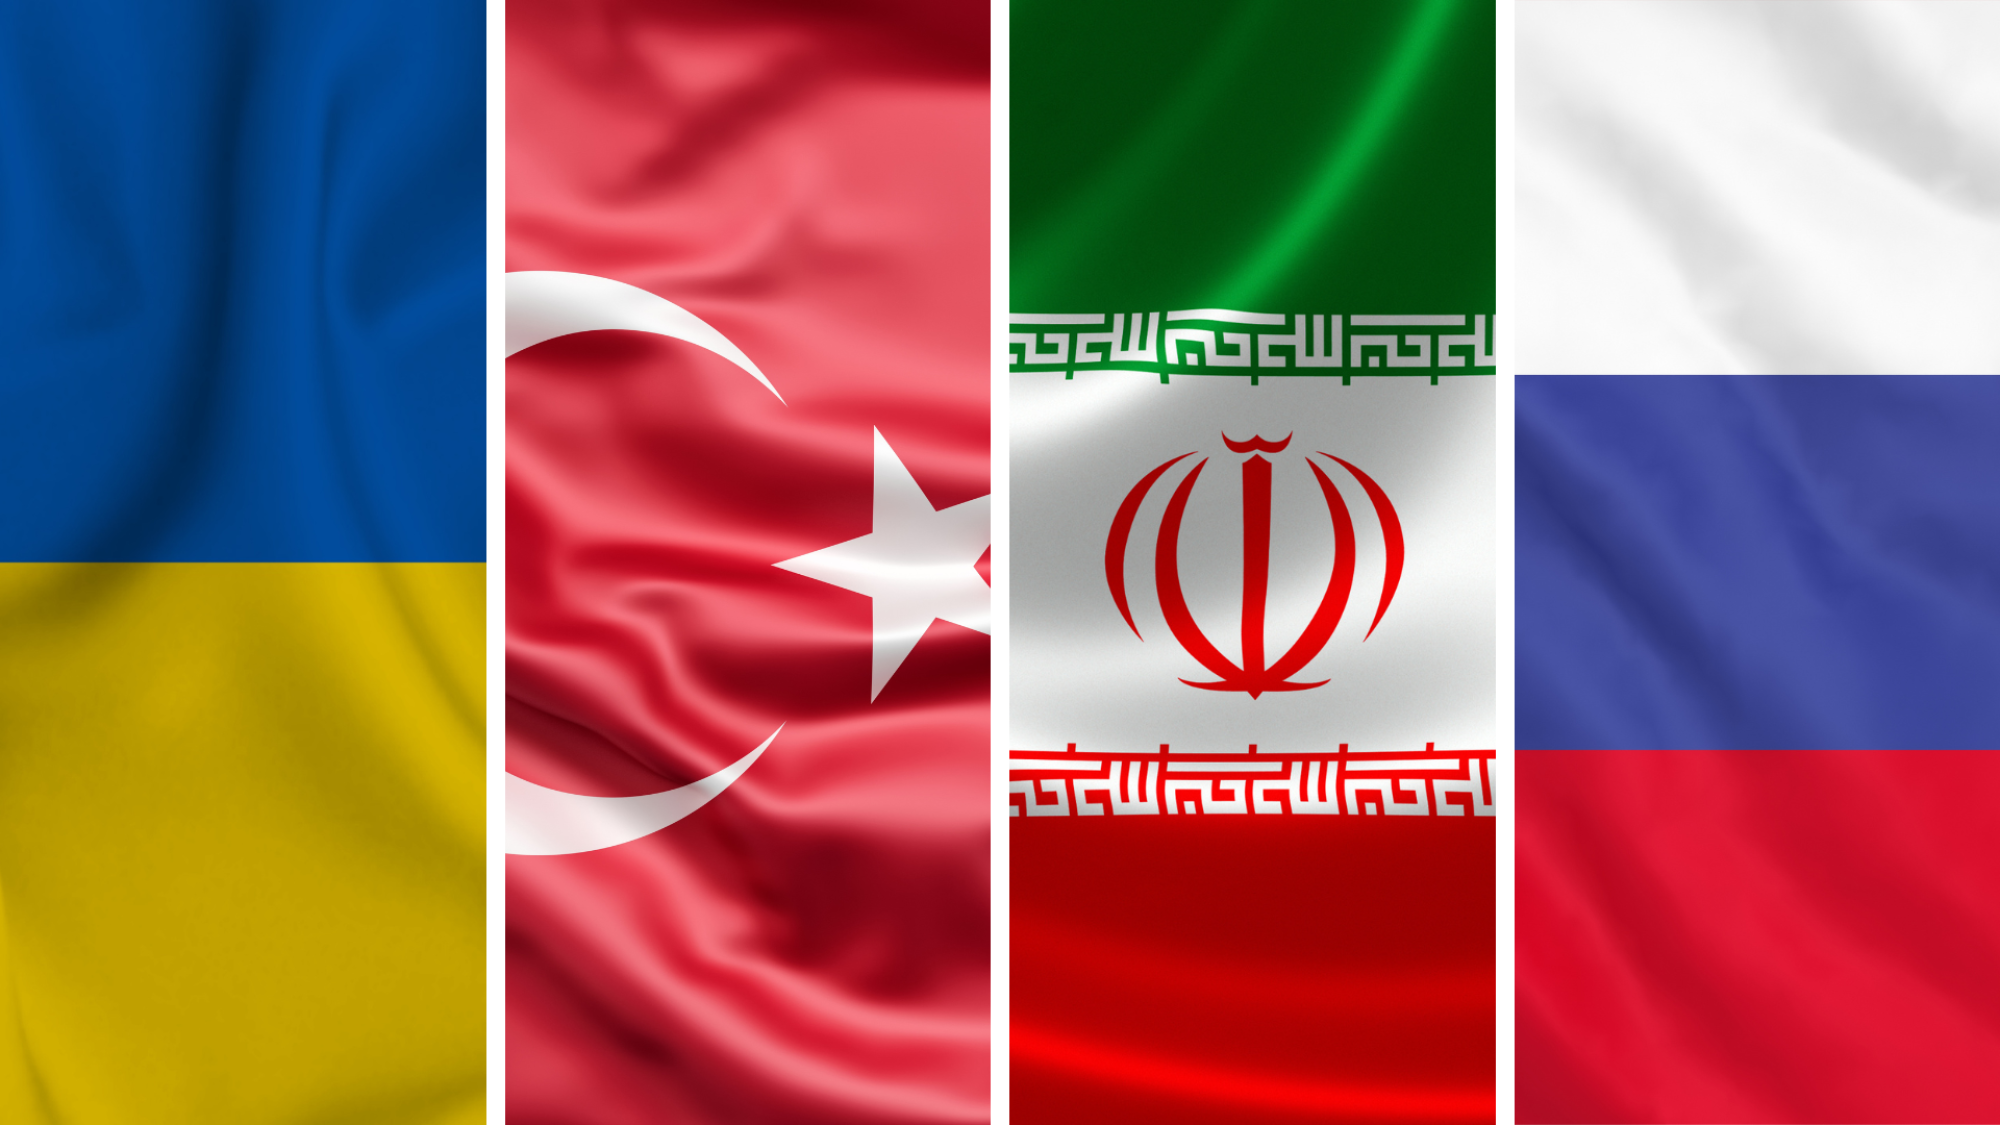 A collage of the flags of Ukraine, Turkey, Iran, and Russia